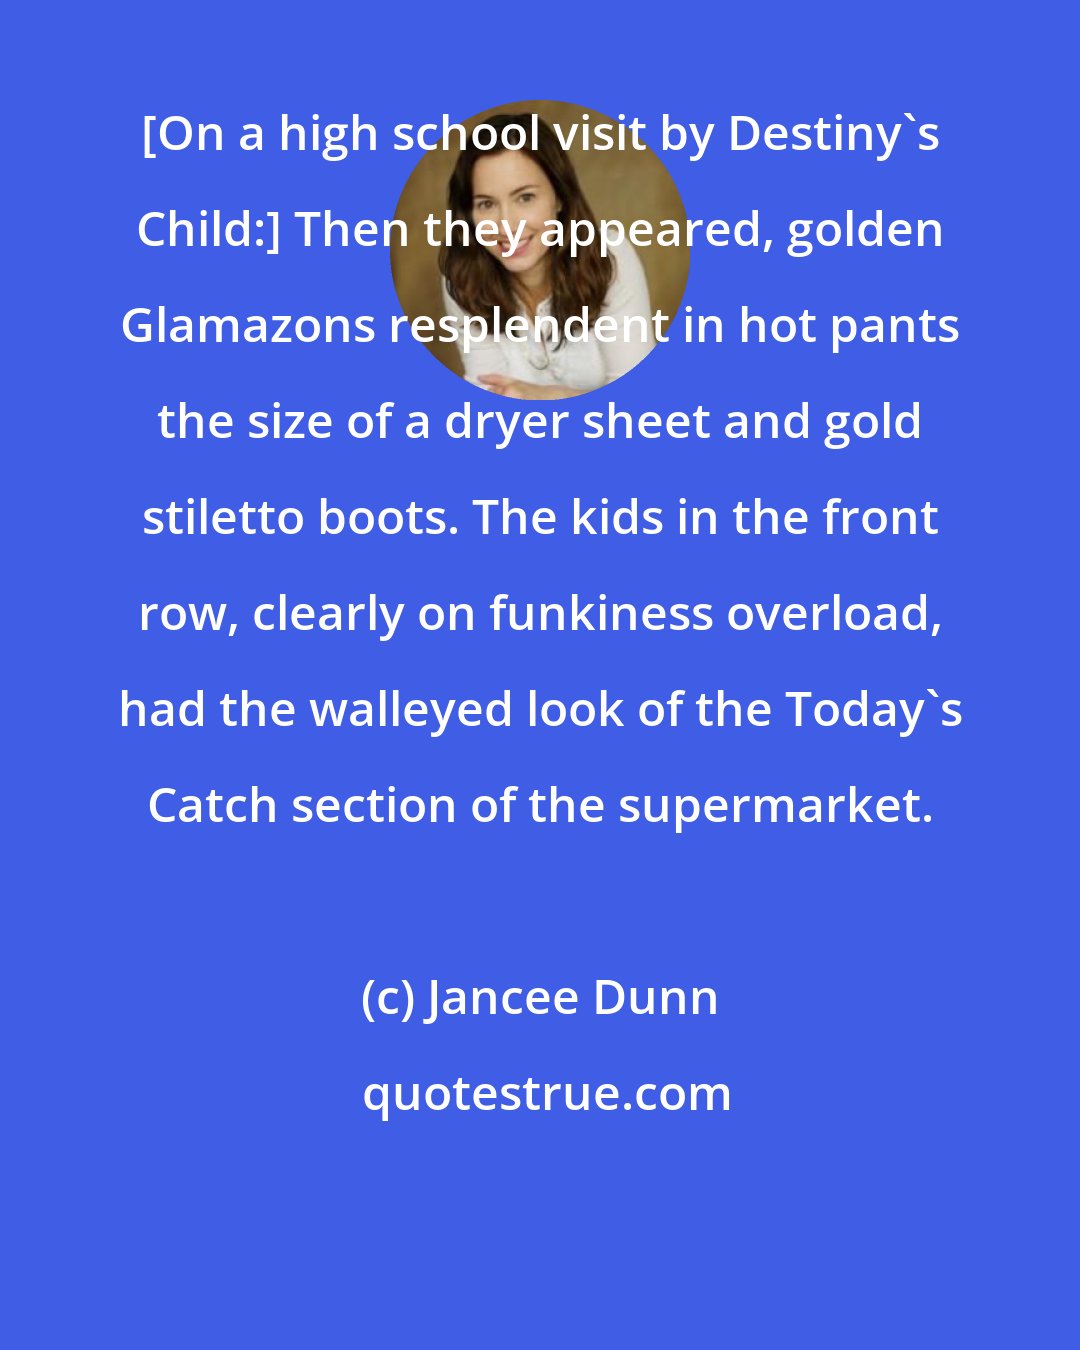 Jancee Dunn: [On a high school visit by Destiny's Child:] Then they appeared, golden Glamazons resplendent in hot pants the size of a dryer sheet and gold stiletto boots. The kids in the front row, clearly on funkiness overload, had the walleyed look of the Today's Catch section of the supermarket.